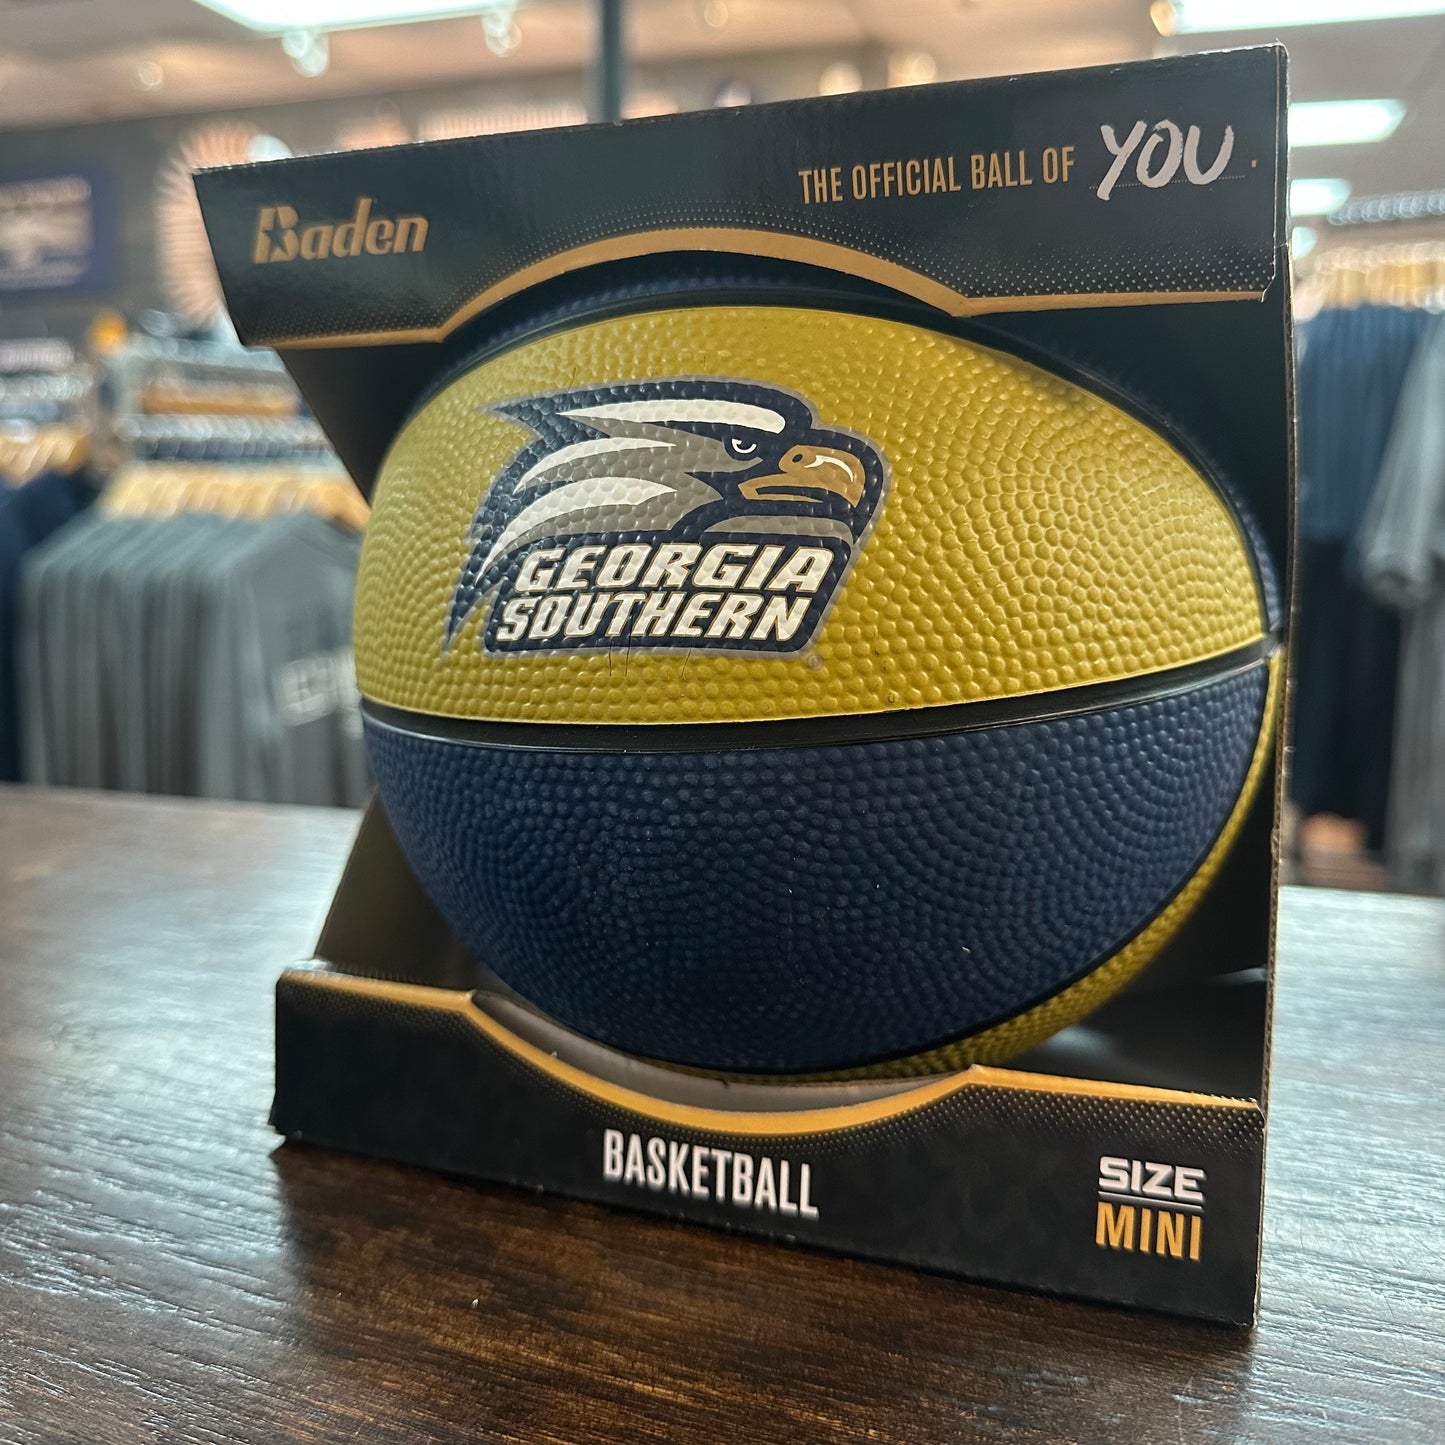 Mini Rubber Basketball - Officially Licensed - Size 3 - 7" Diameter